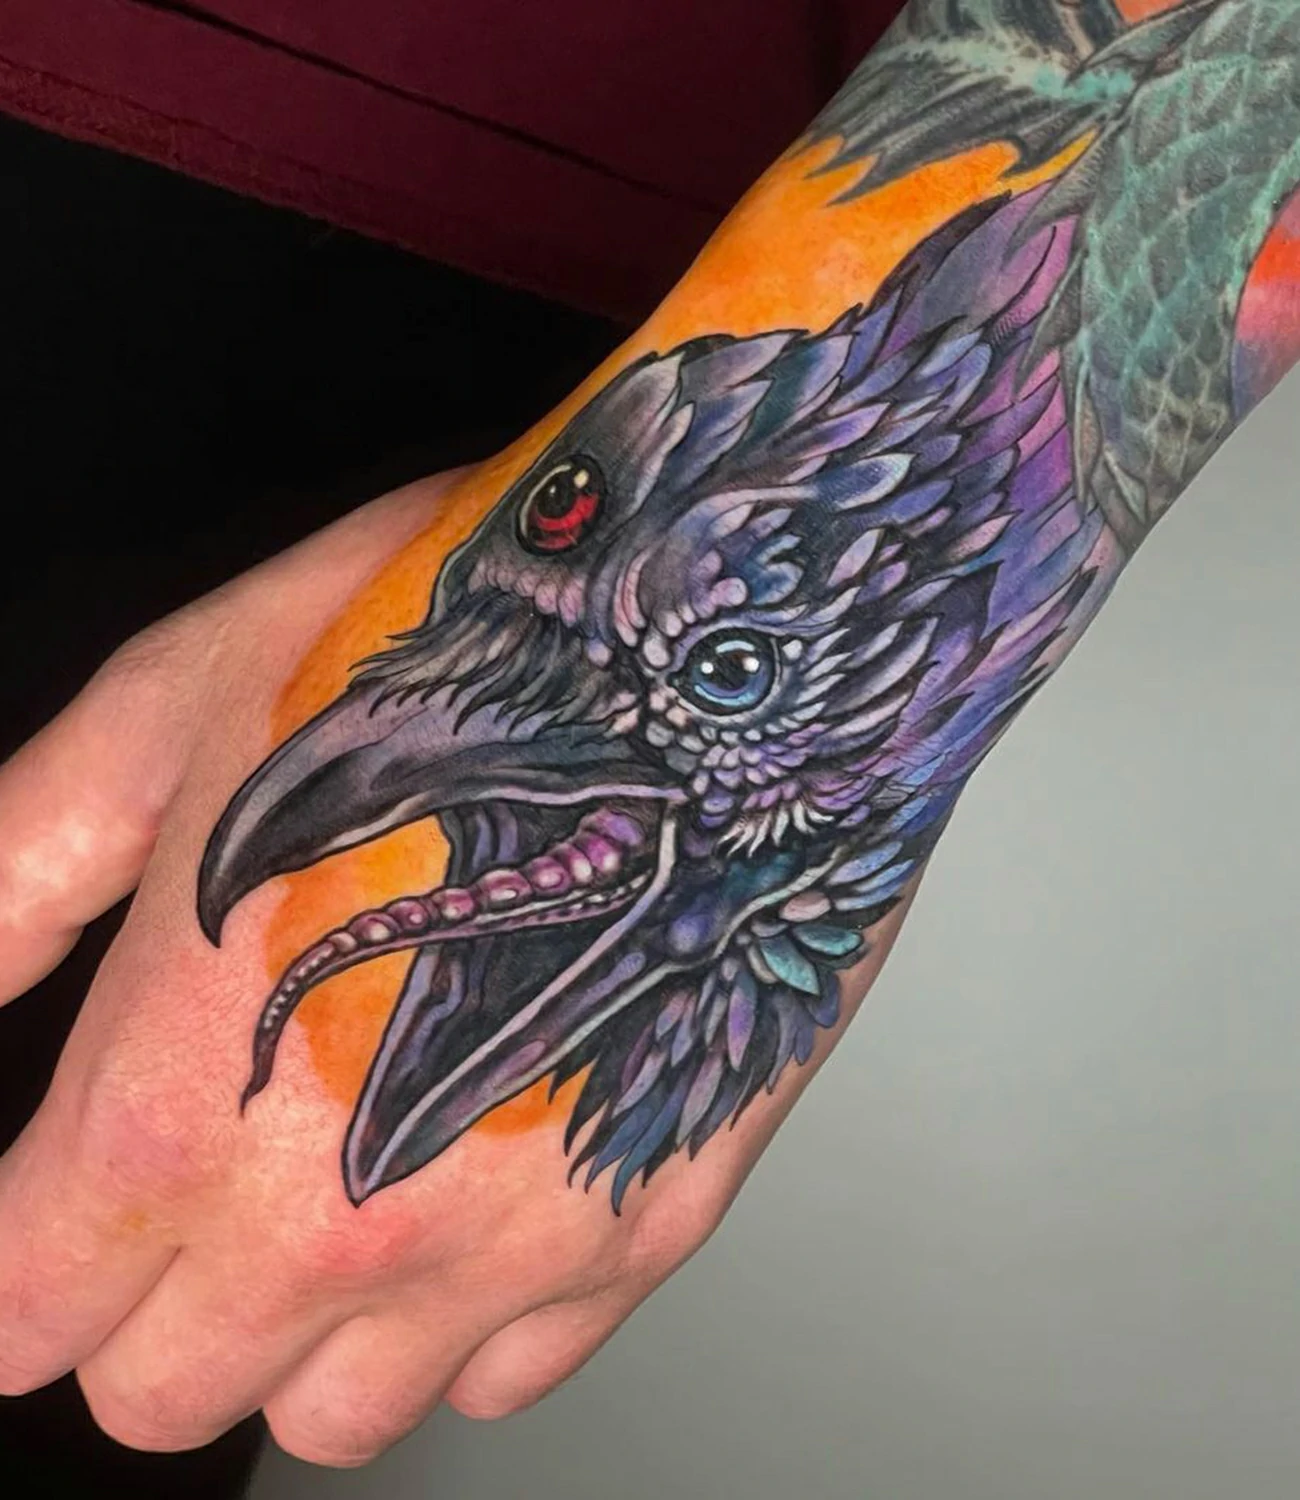 Three-eyed raven tattoo: A mystical tattoo of a raven with three eyes.